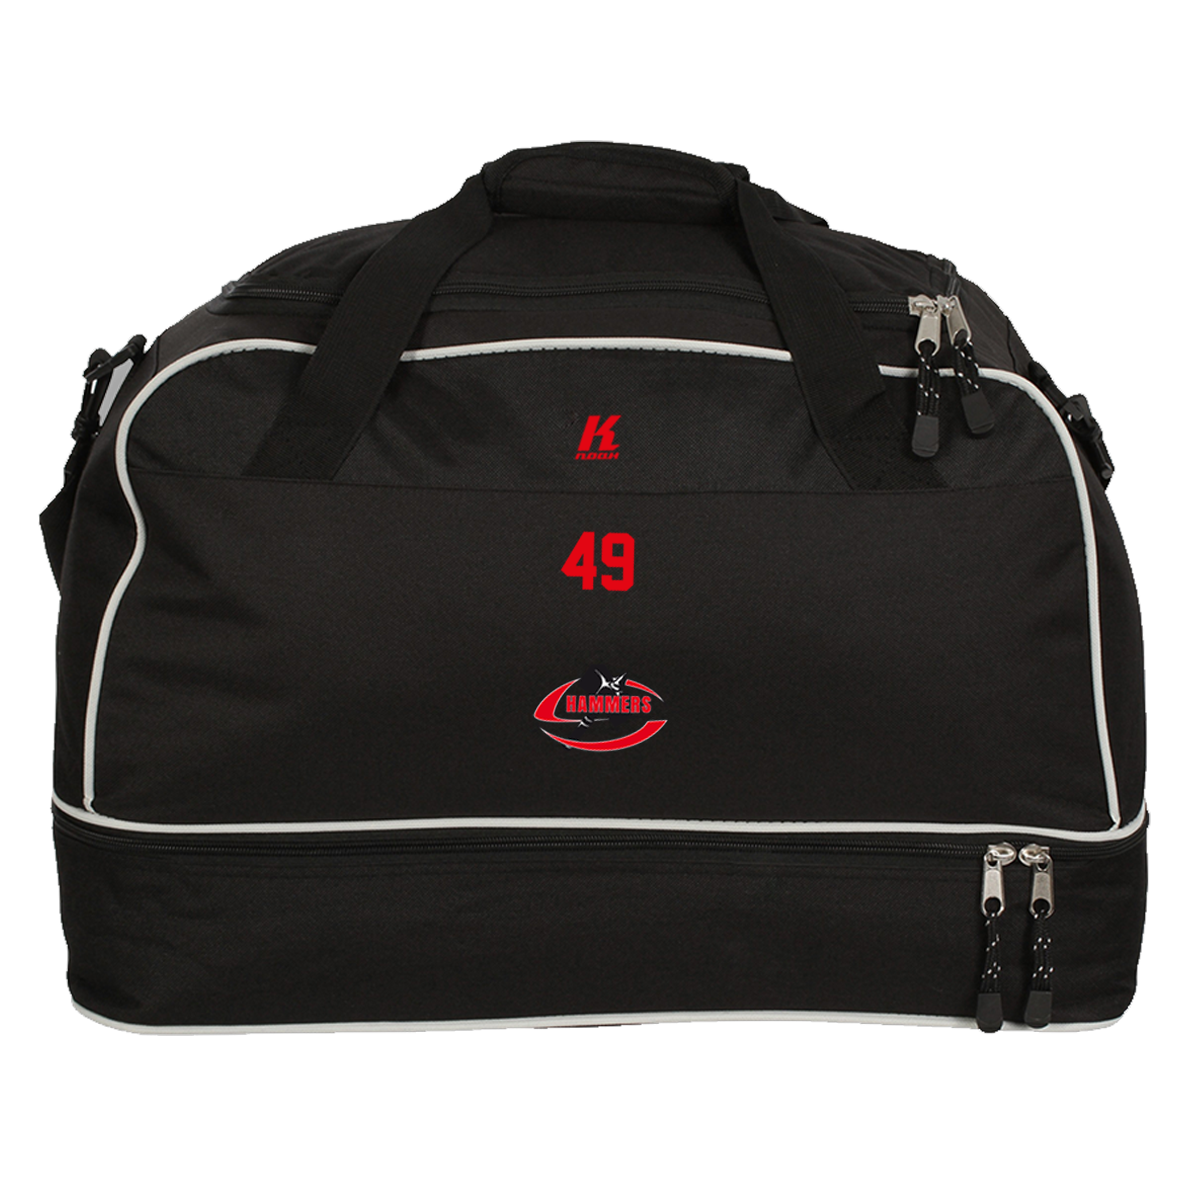 S-Hammers Players CT Bag with Playernumber or Initials